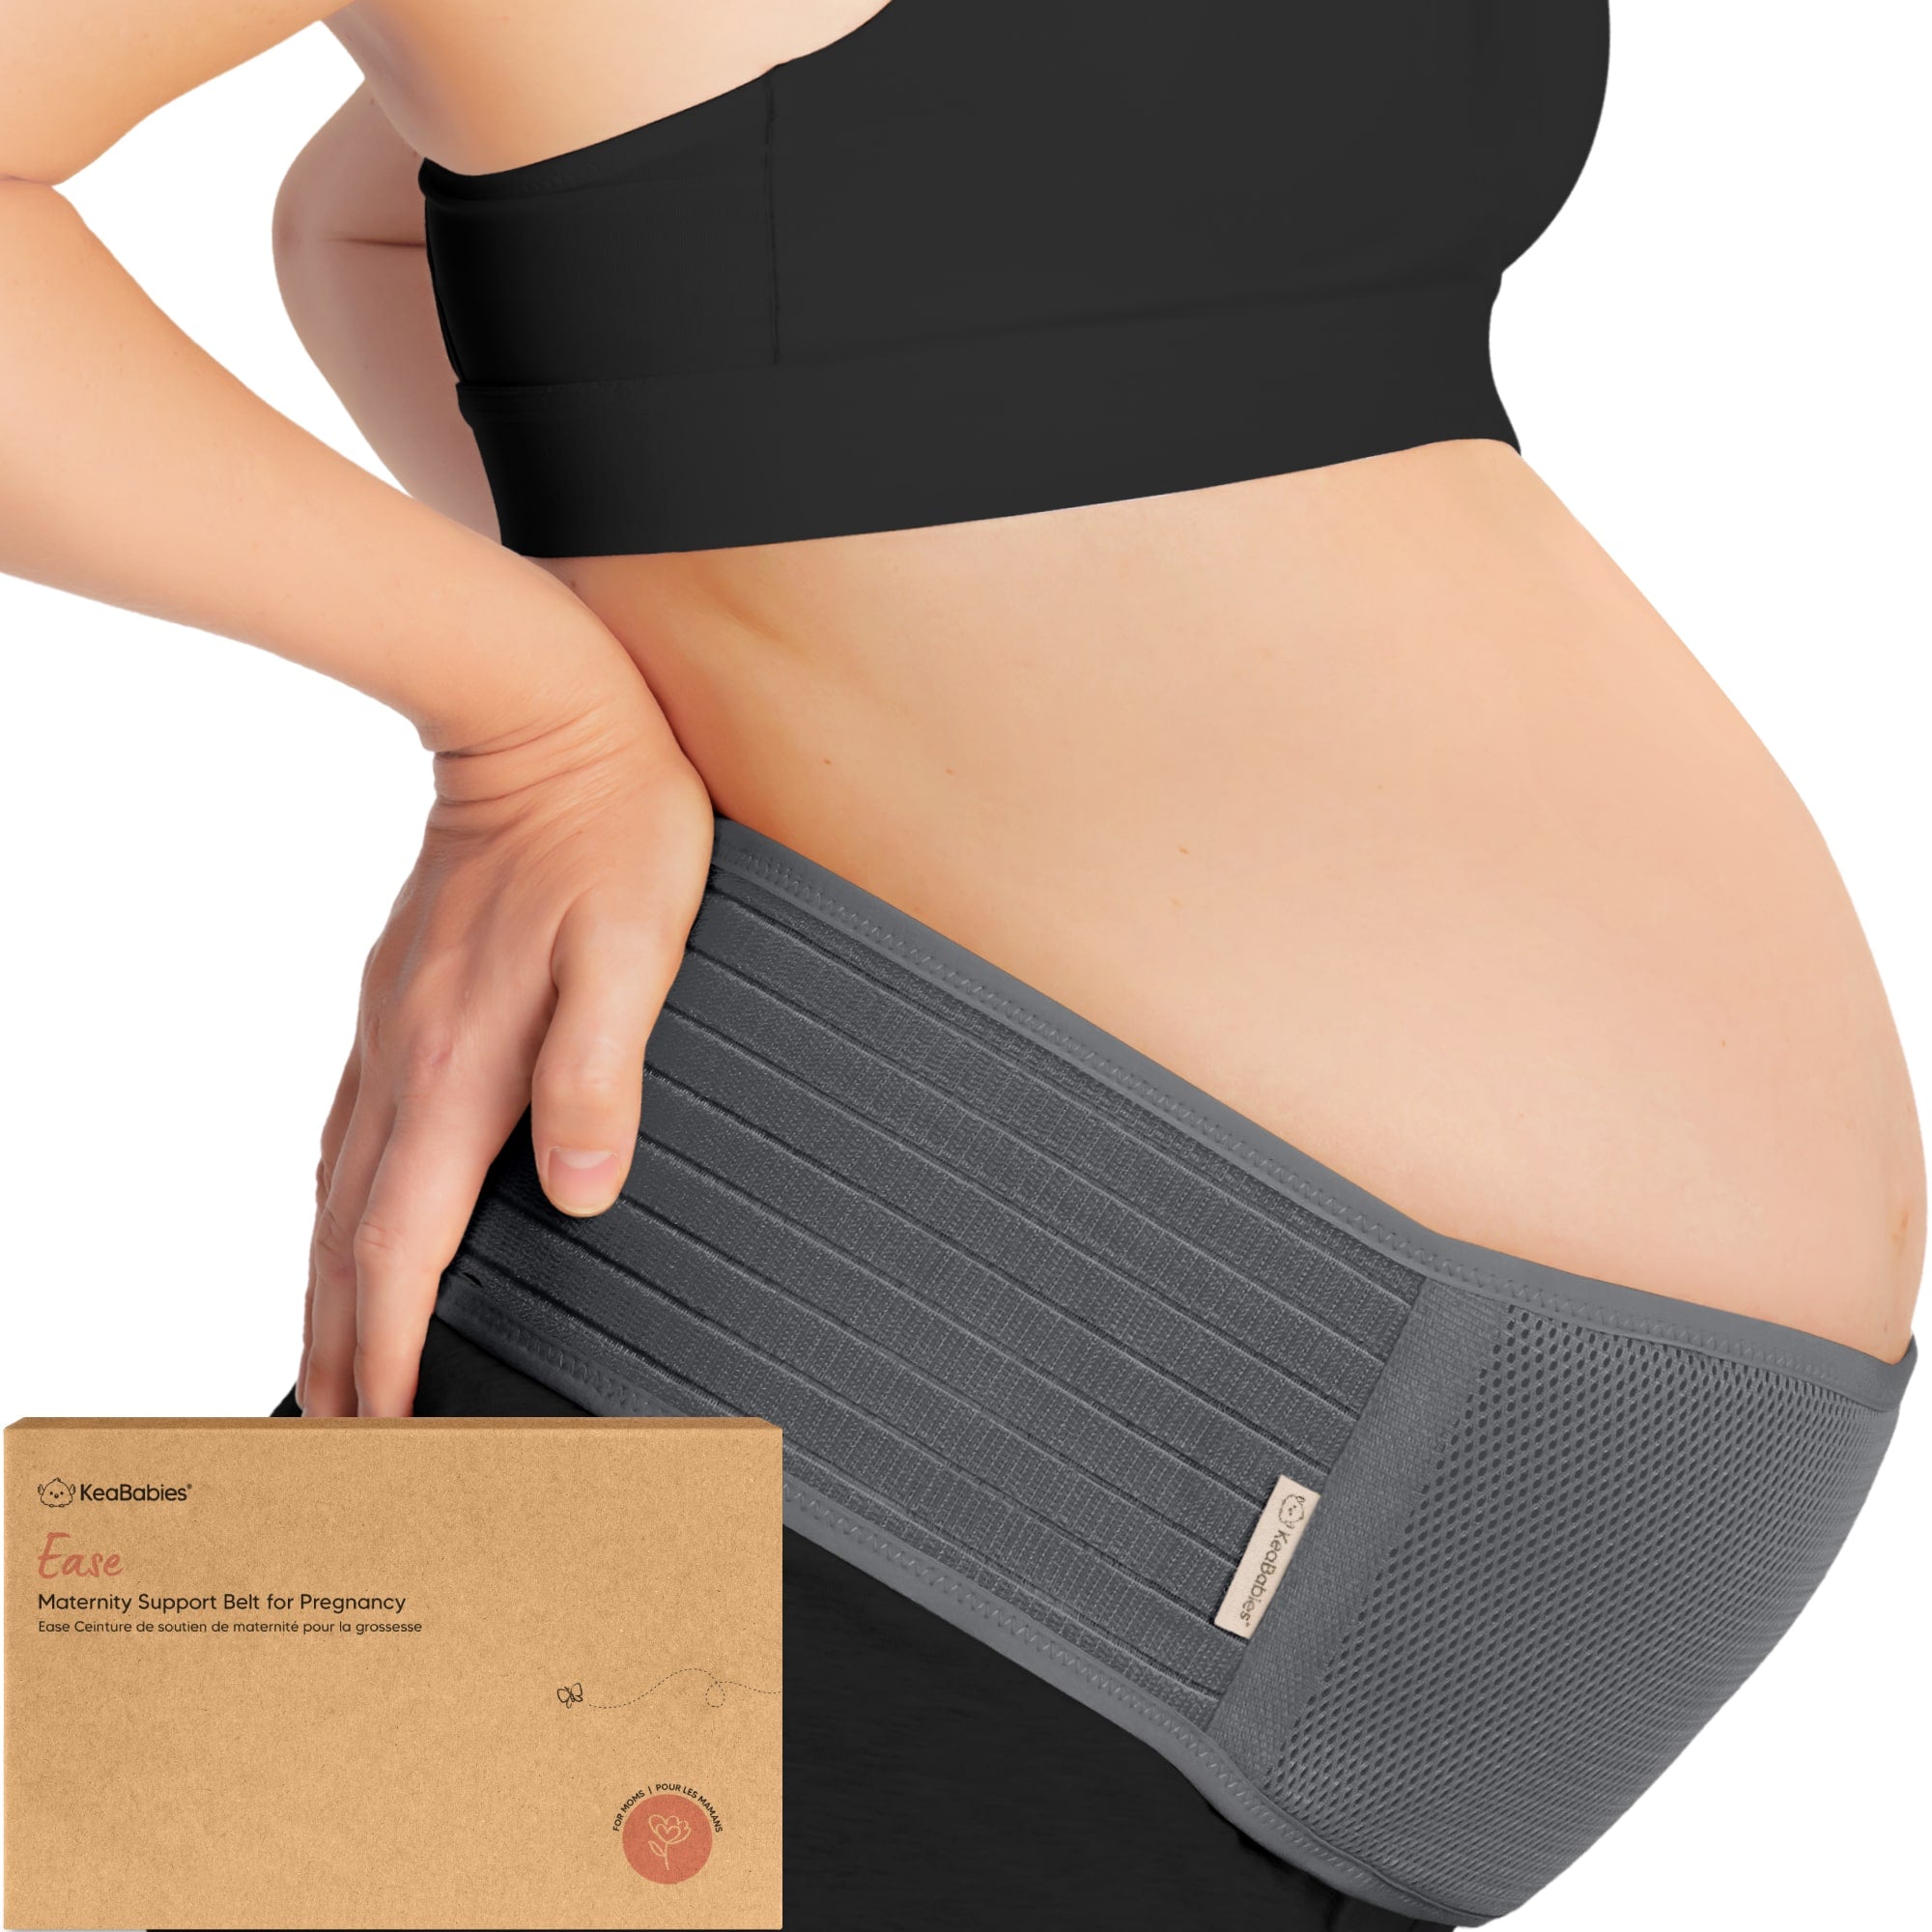 Find Cheap, Fashionable and Slimming postpartum belly belt